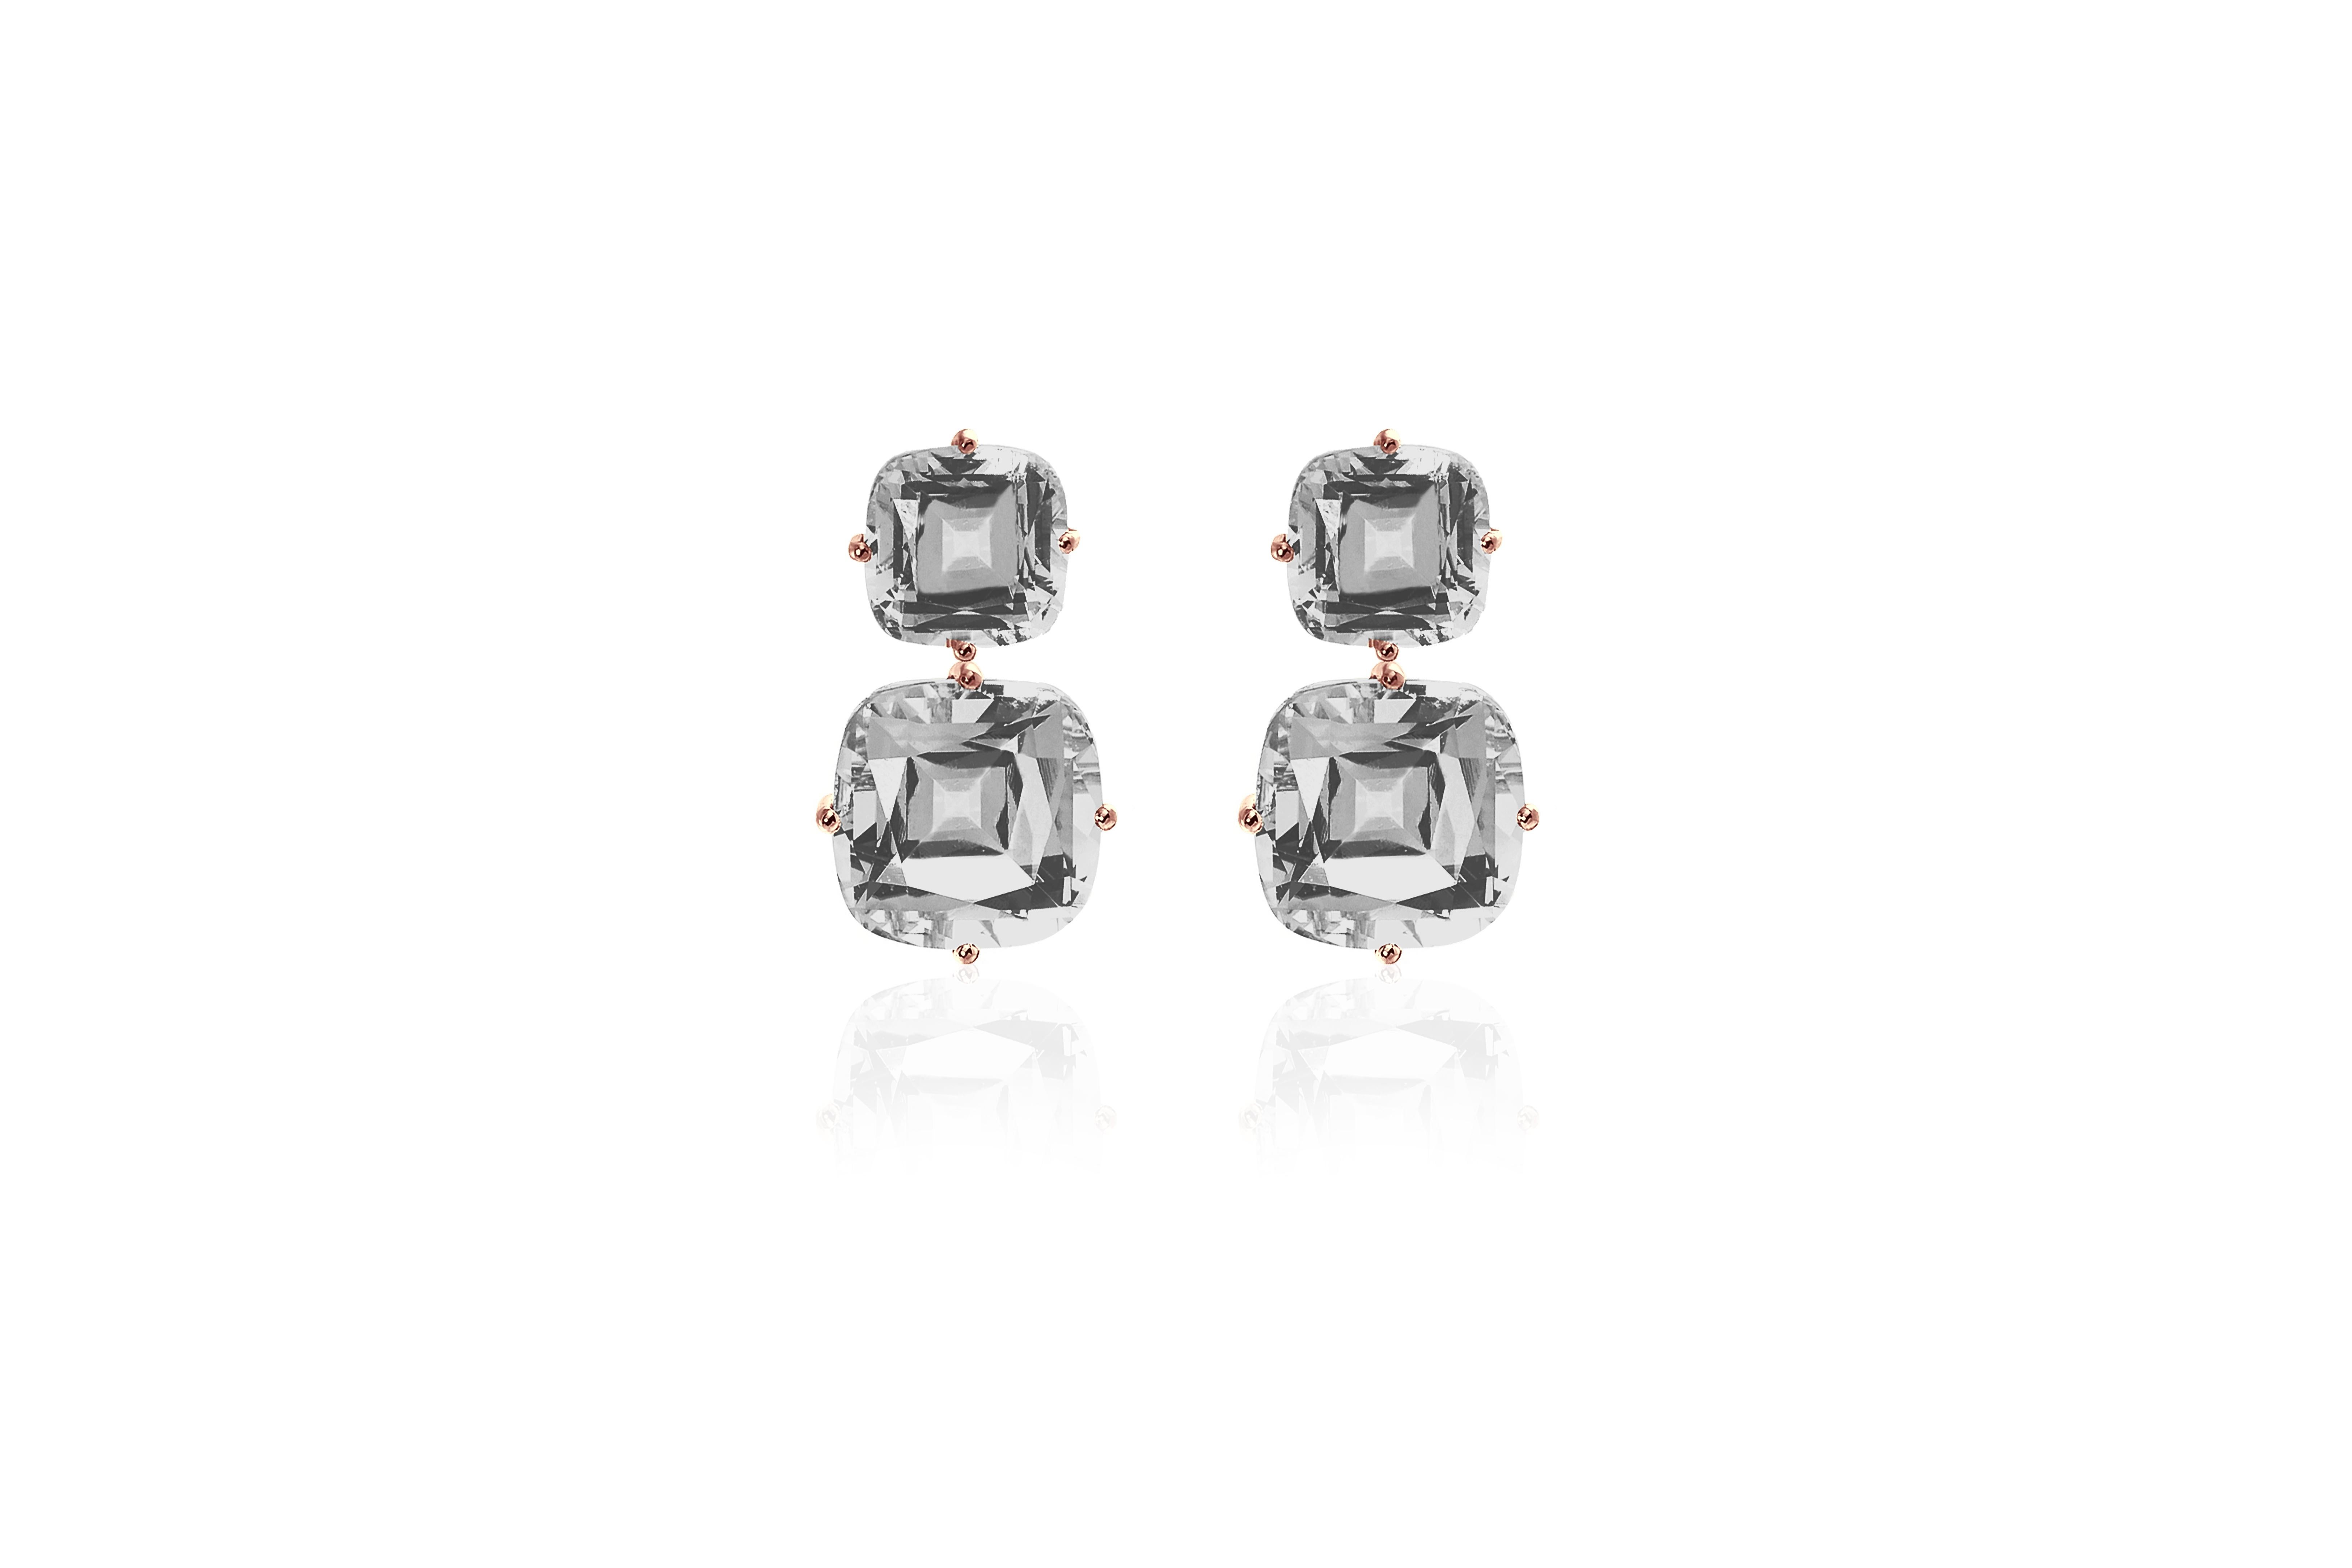 Contemporary Goshwara 2 Tier Rock Crystal Cushion Earrings For Sale